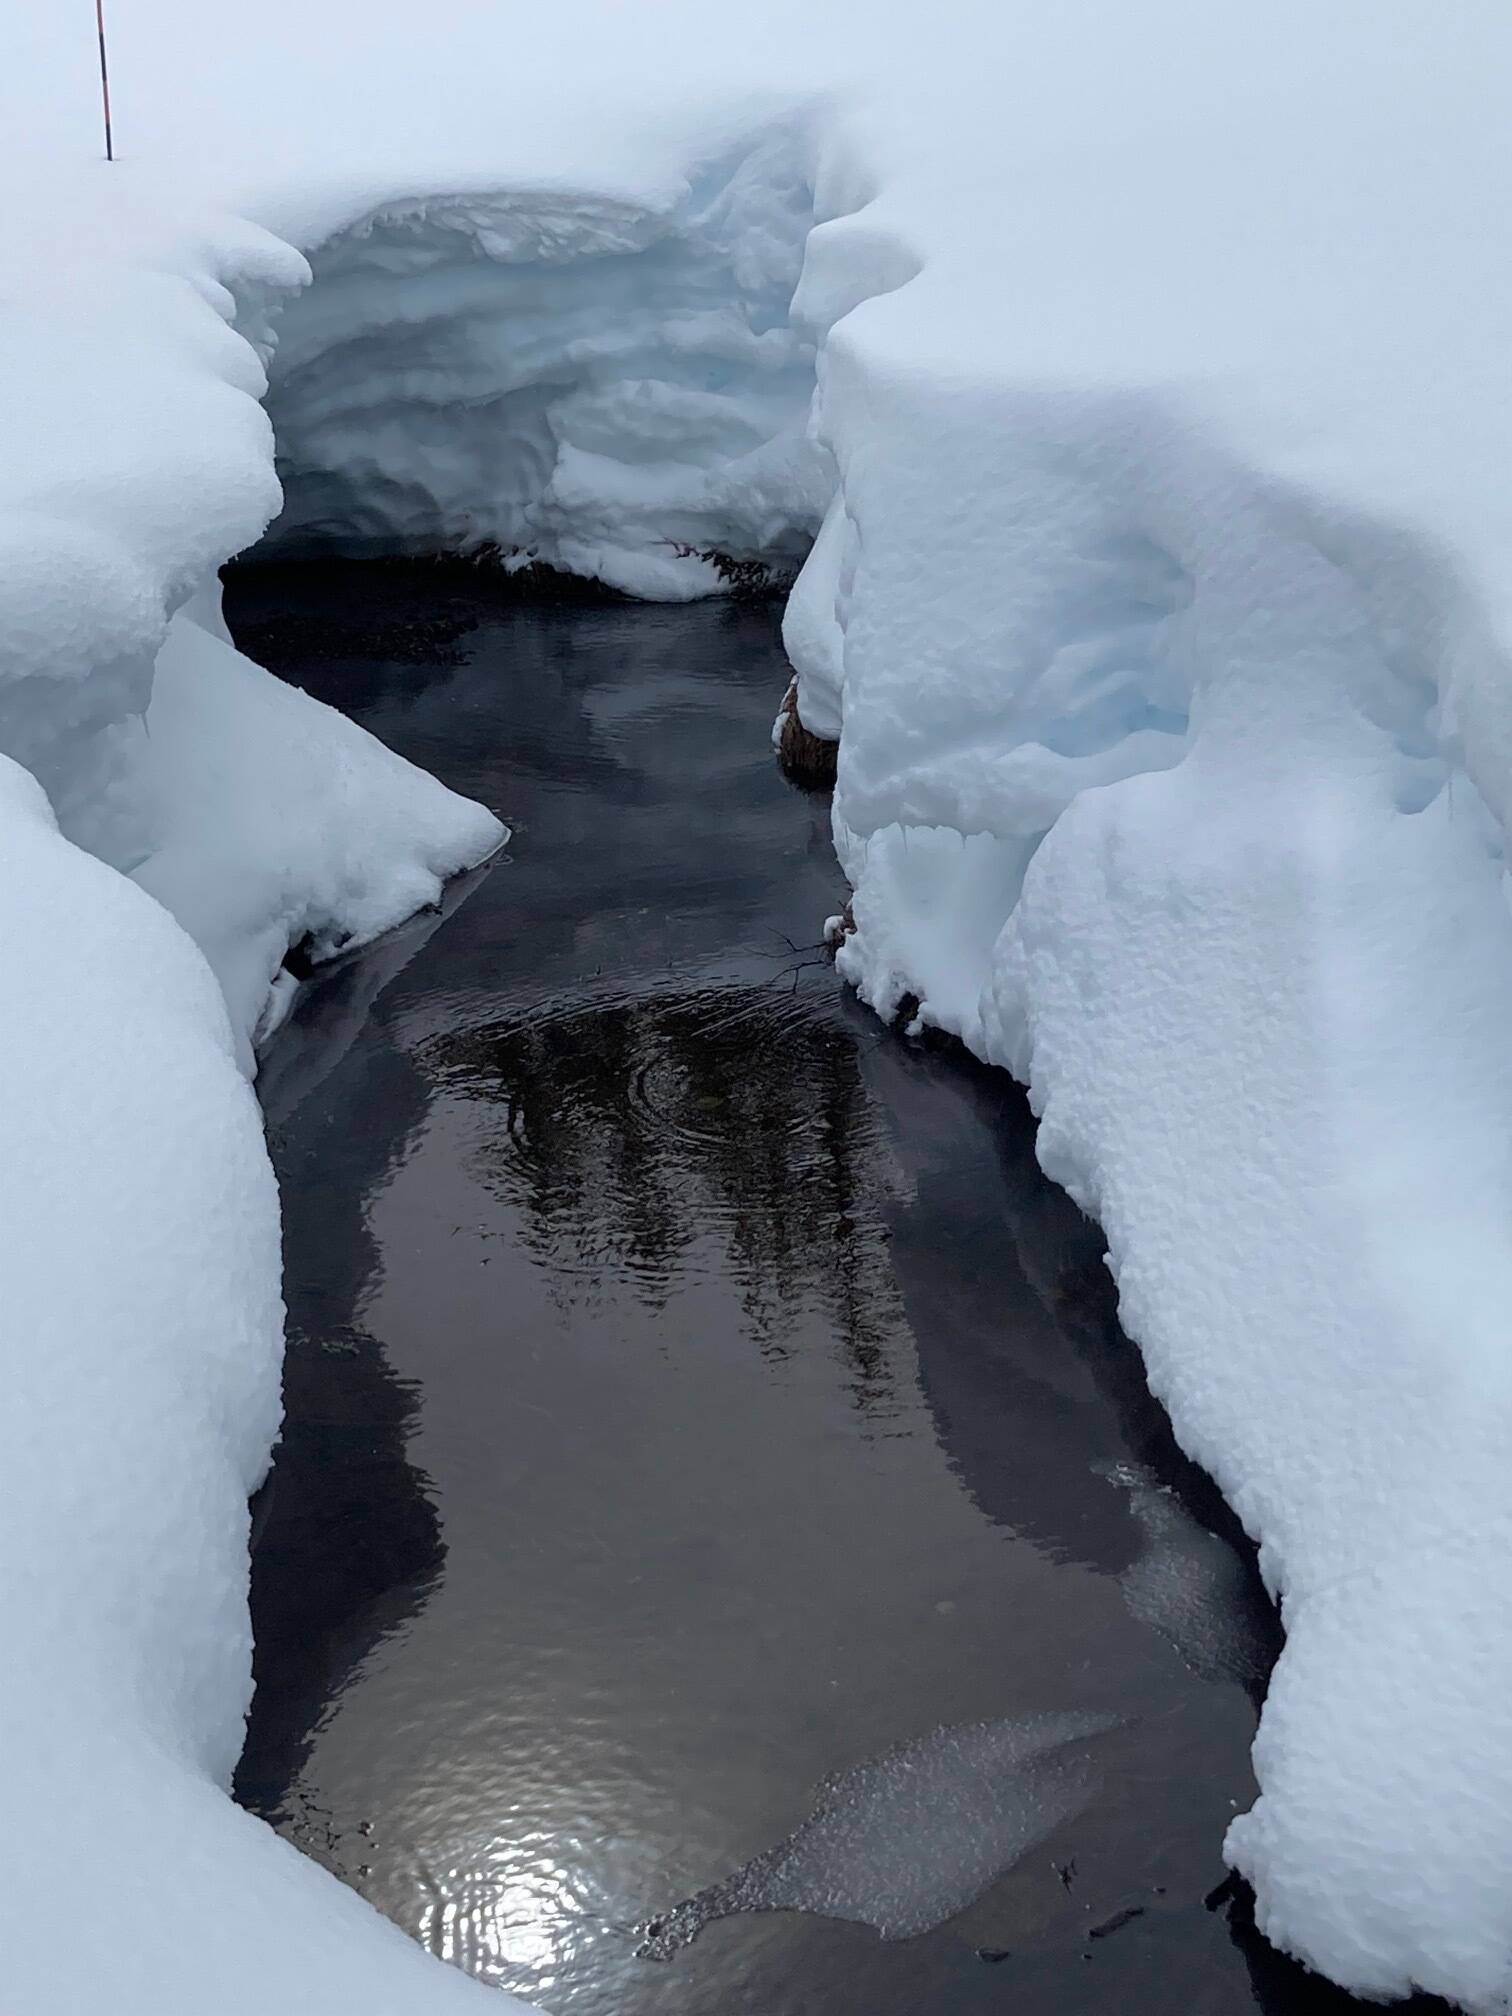 This photo taken on a recent weekend shows layers of snow along a creek at Eaglecrest. (Courtesy Photo / Deborah Rudis)